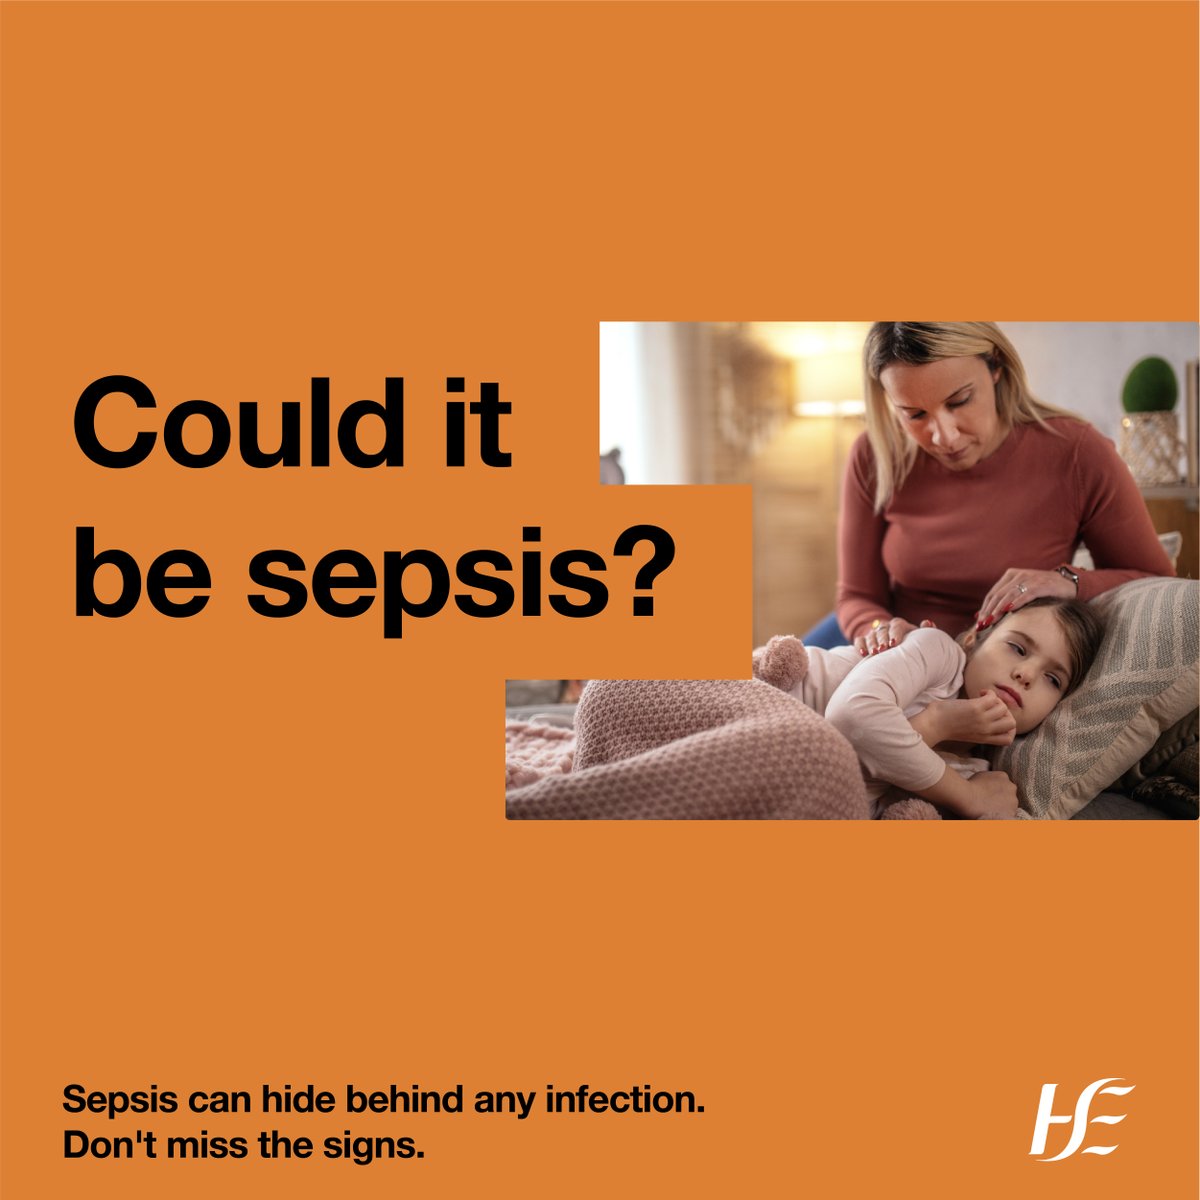 Sepsis is a life-threatening complication of an infection. If your child has had an infection and is very unwell, ask 'could it be sepsis?' For information on the symptoms to look out for, visit: bit.ly/3WH21Fq